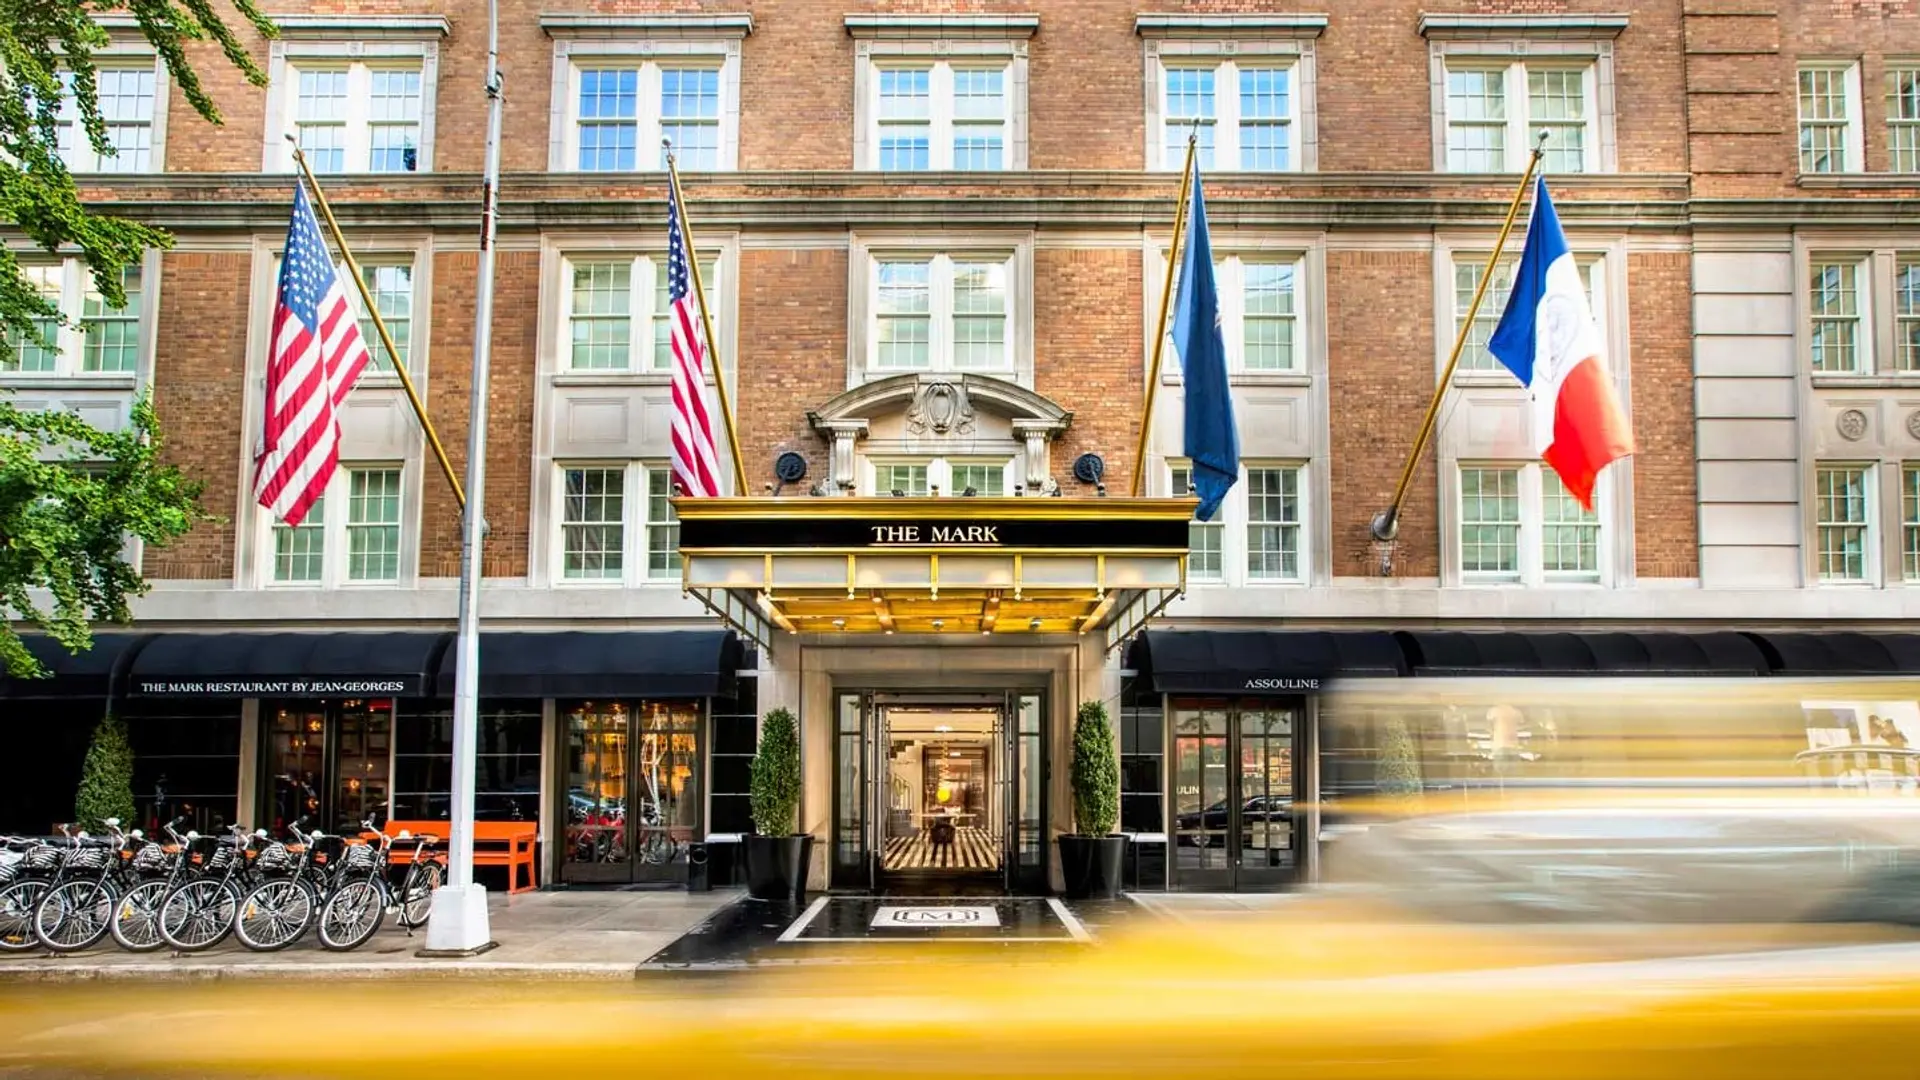 Hotel review What We Love' - The Mark New York - 1